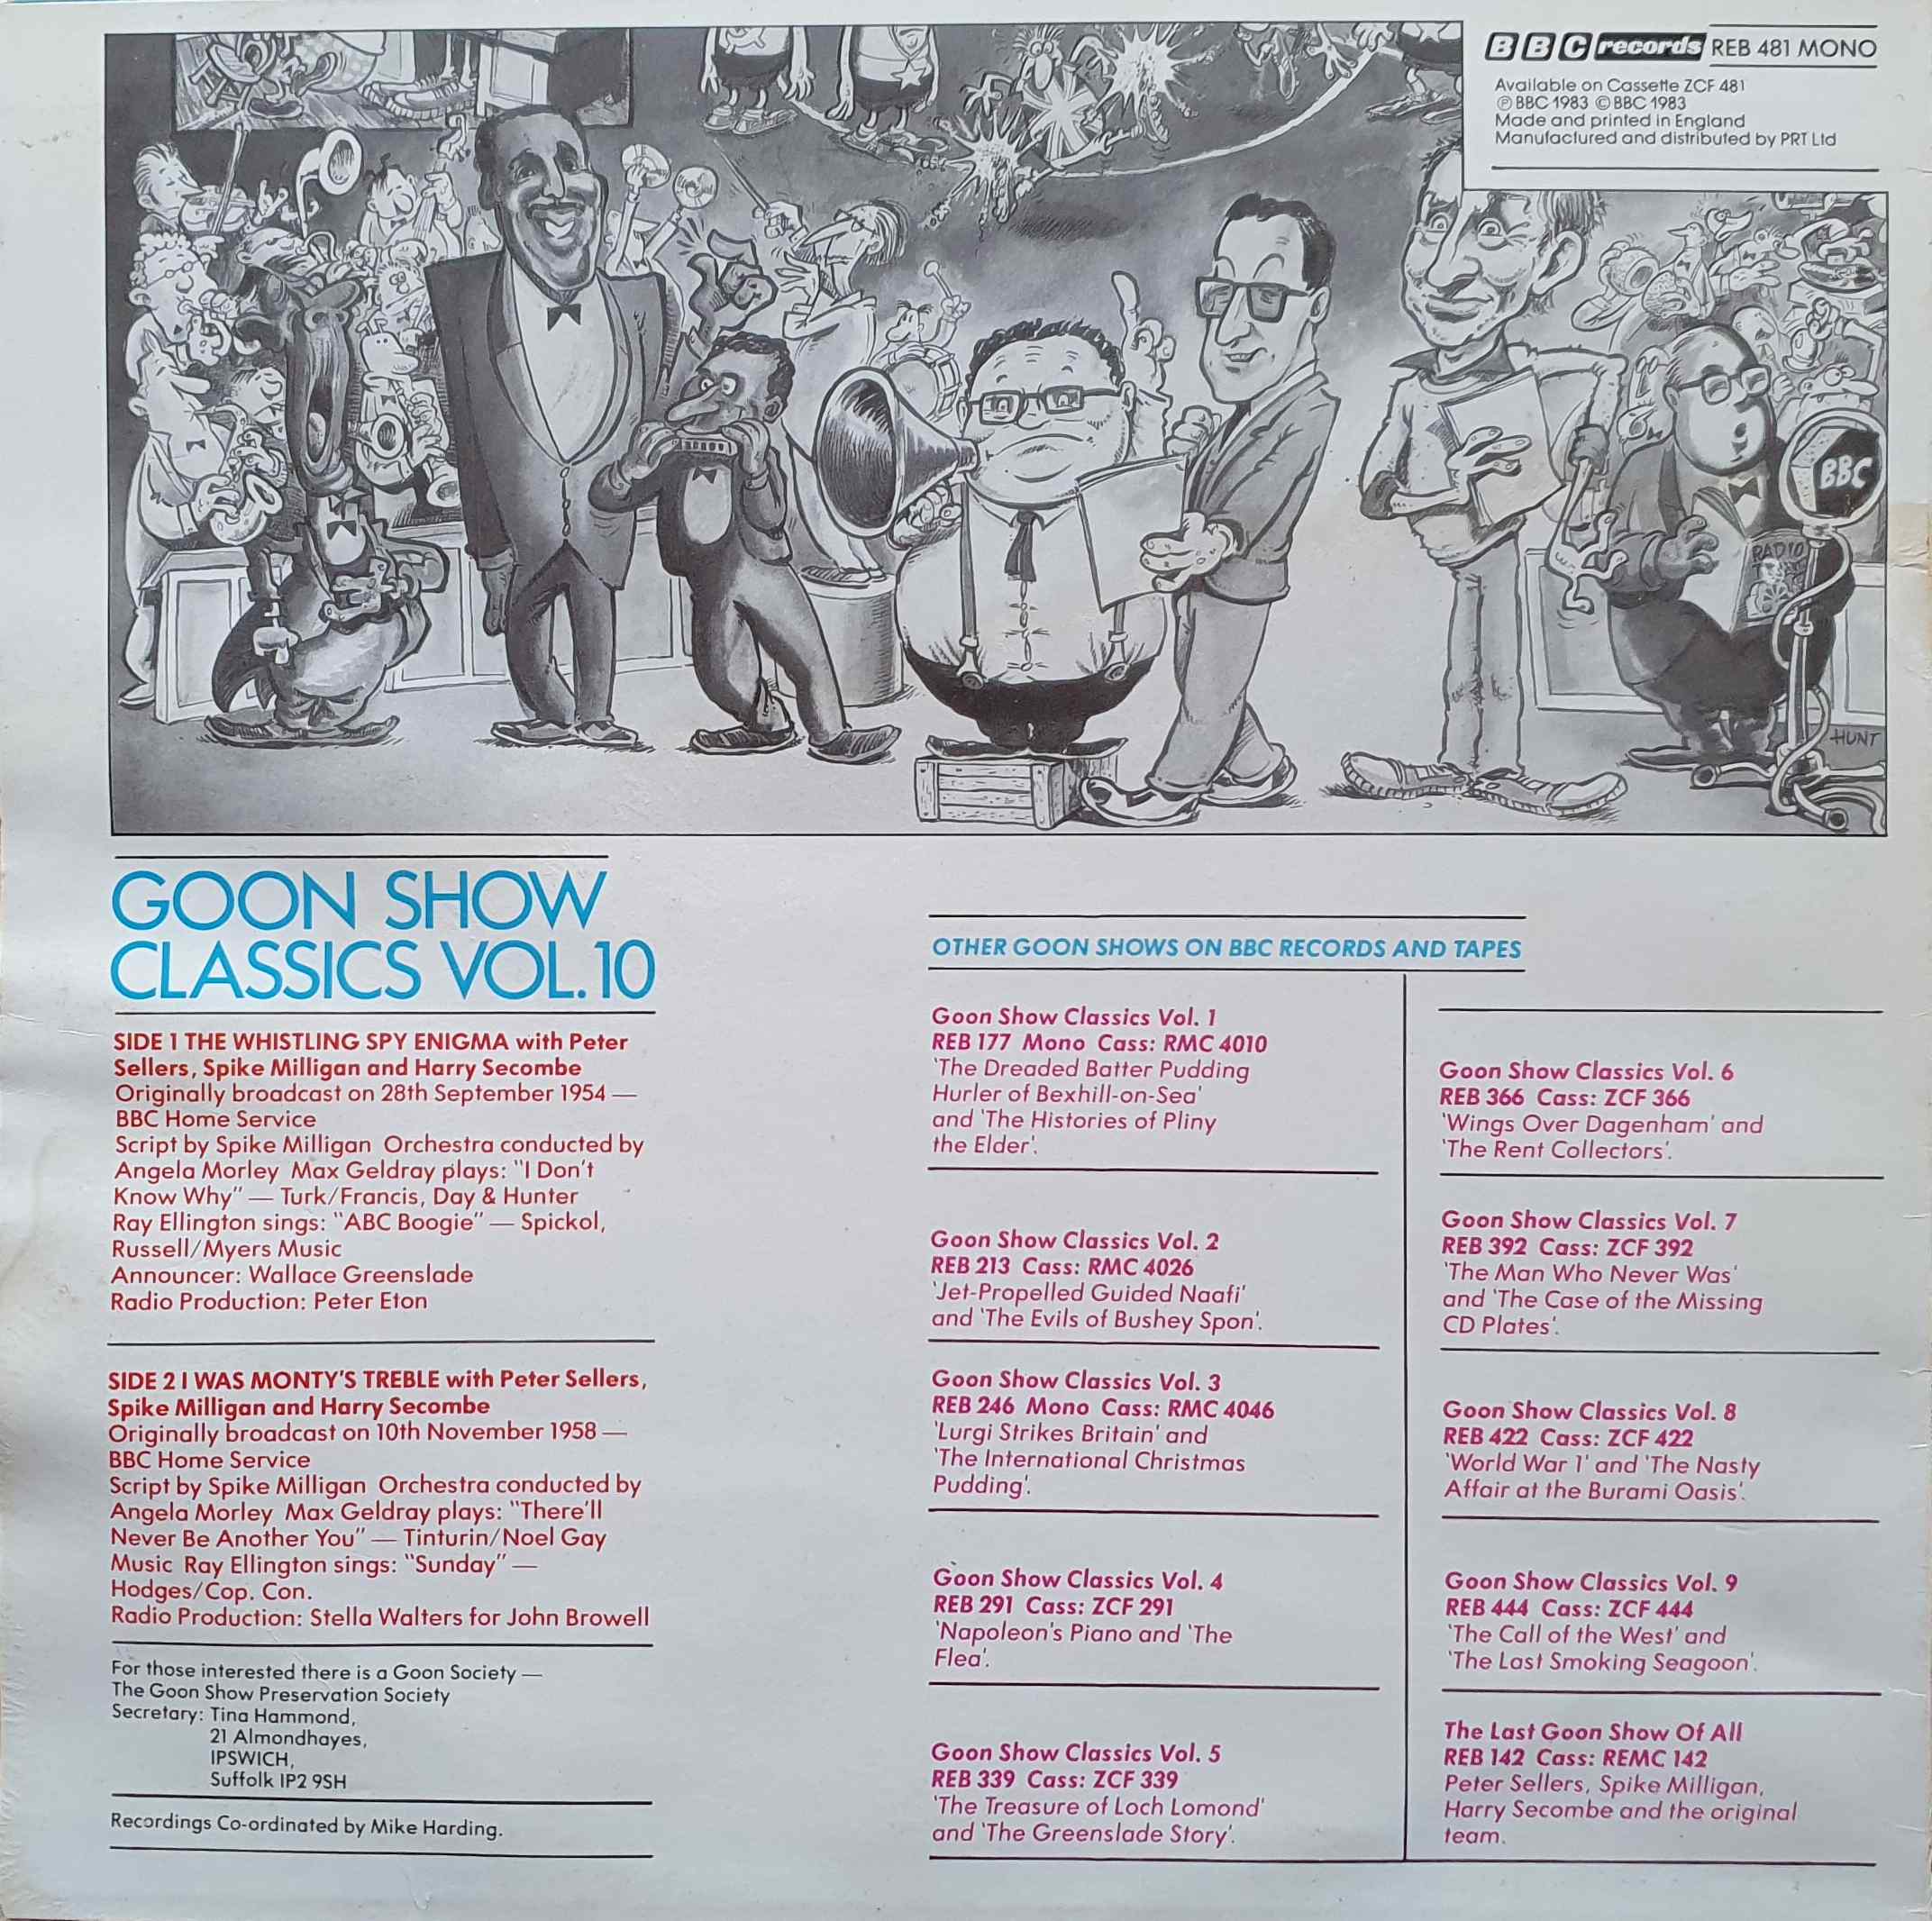 Picture of REB 481 Goon show classics - Volume 10 by artist Spike Milligan from the BBC records and Tapes library